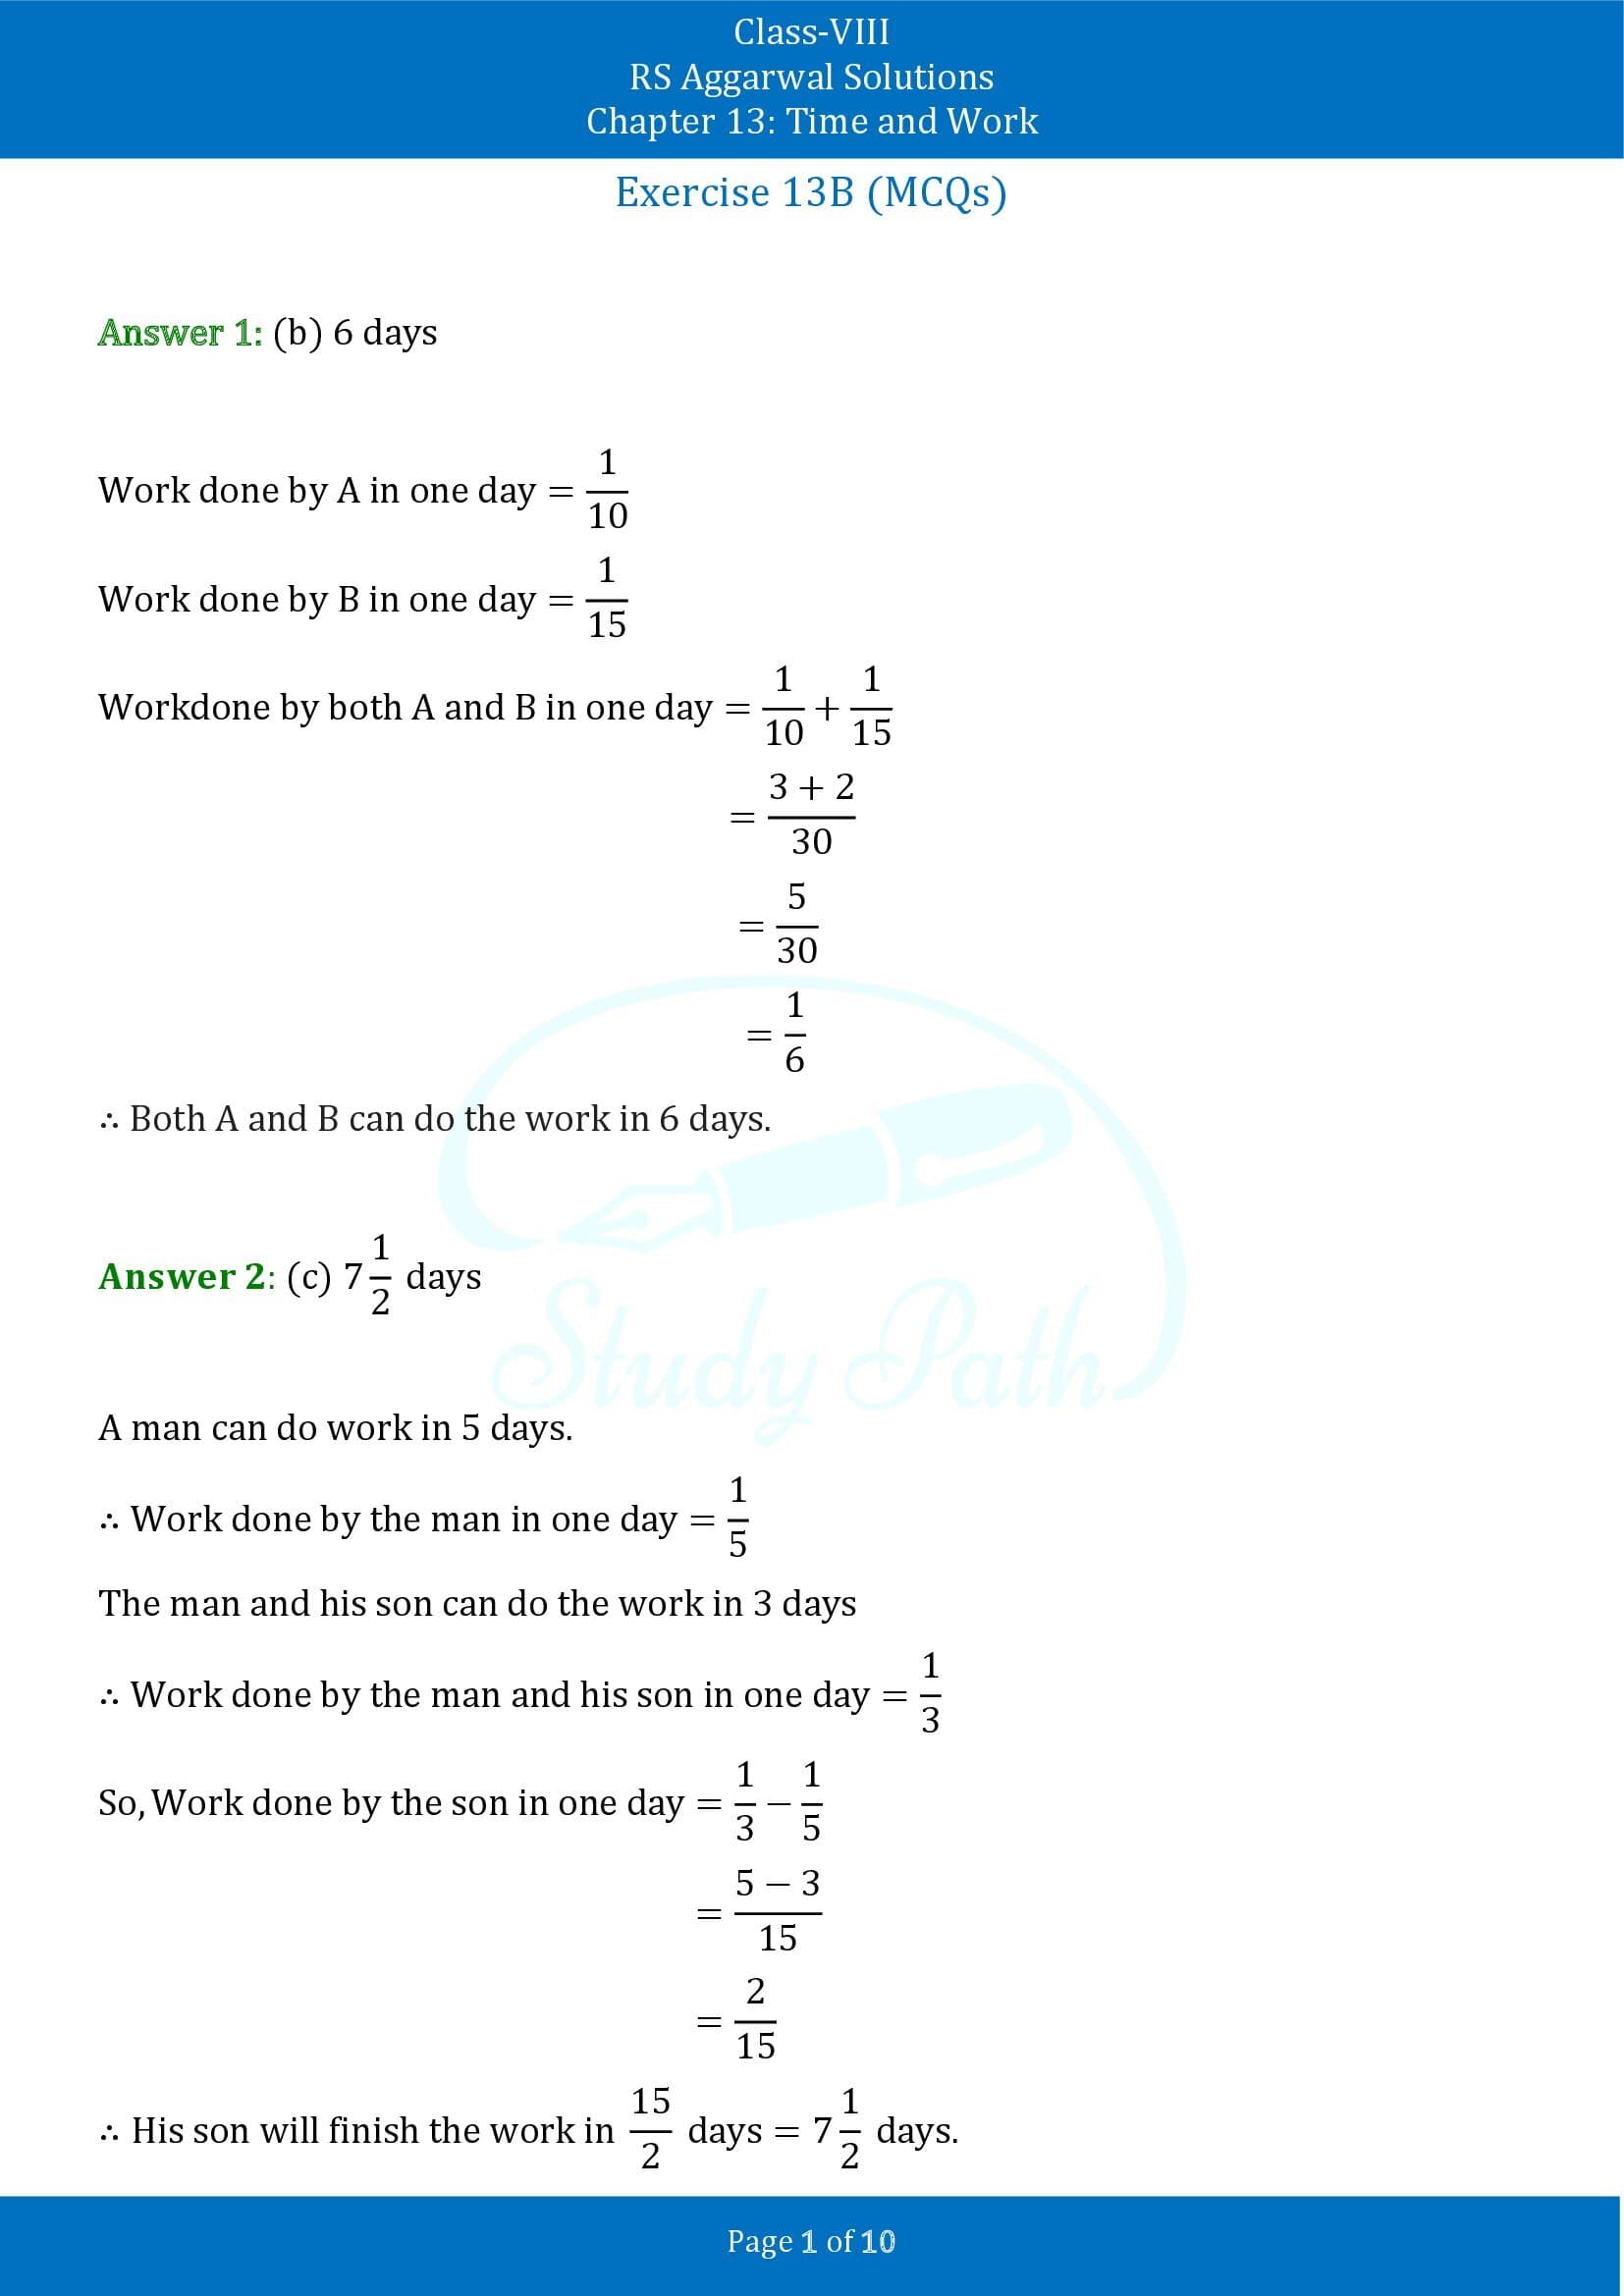 RS Aggarwal Solutions Class 8 Chapter 13 Time and Work Exercise 13B MCQs 00001